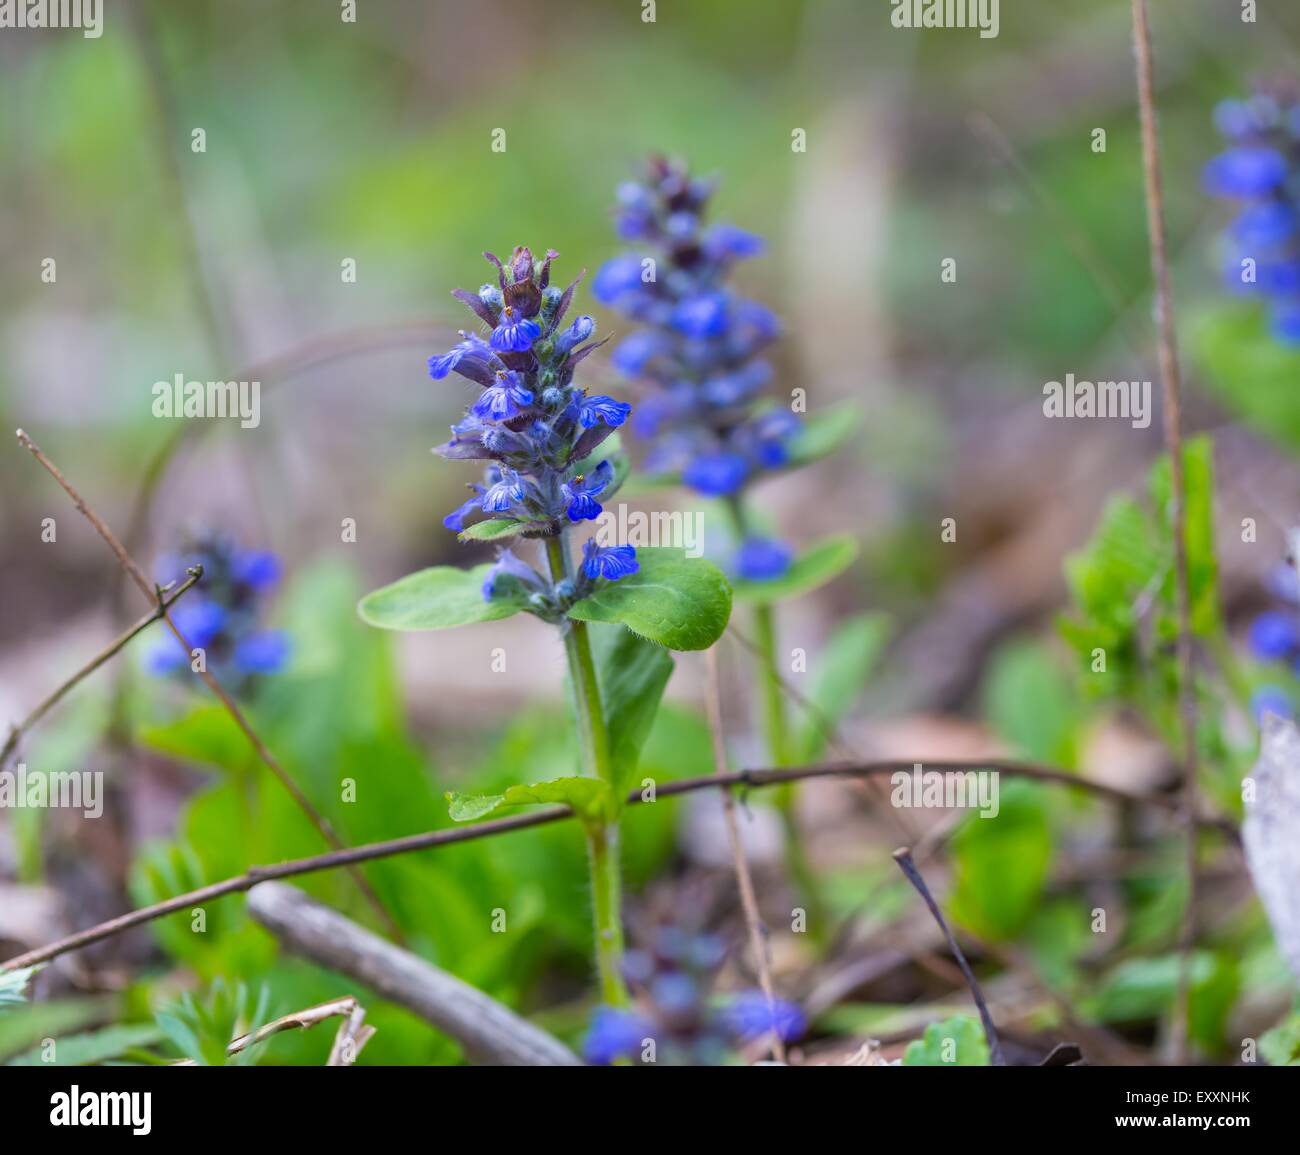 Blooming bugle plant. Wild blue flowers growing in forest. Stock Photo